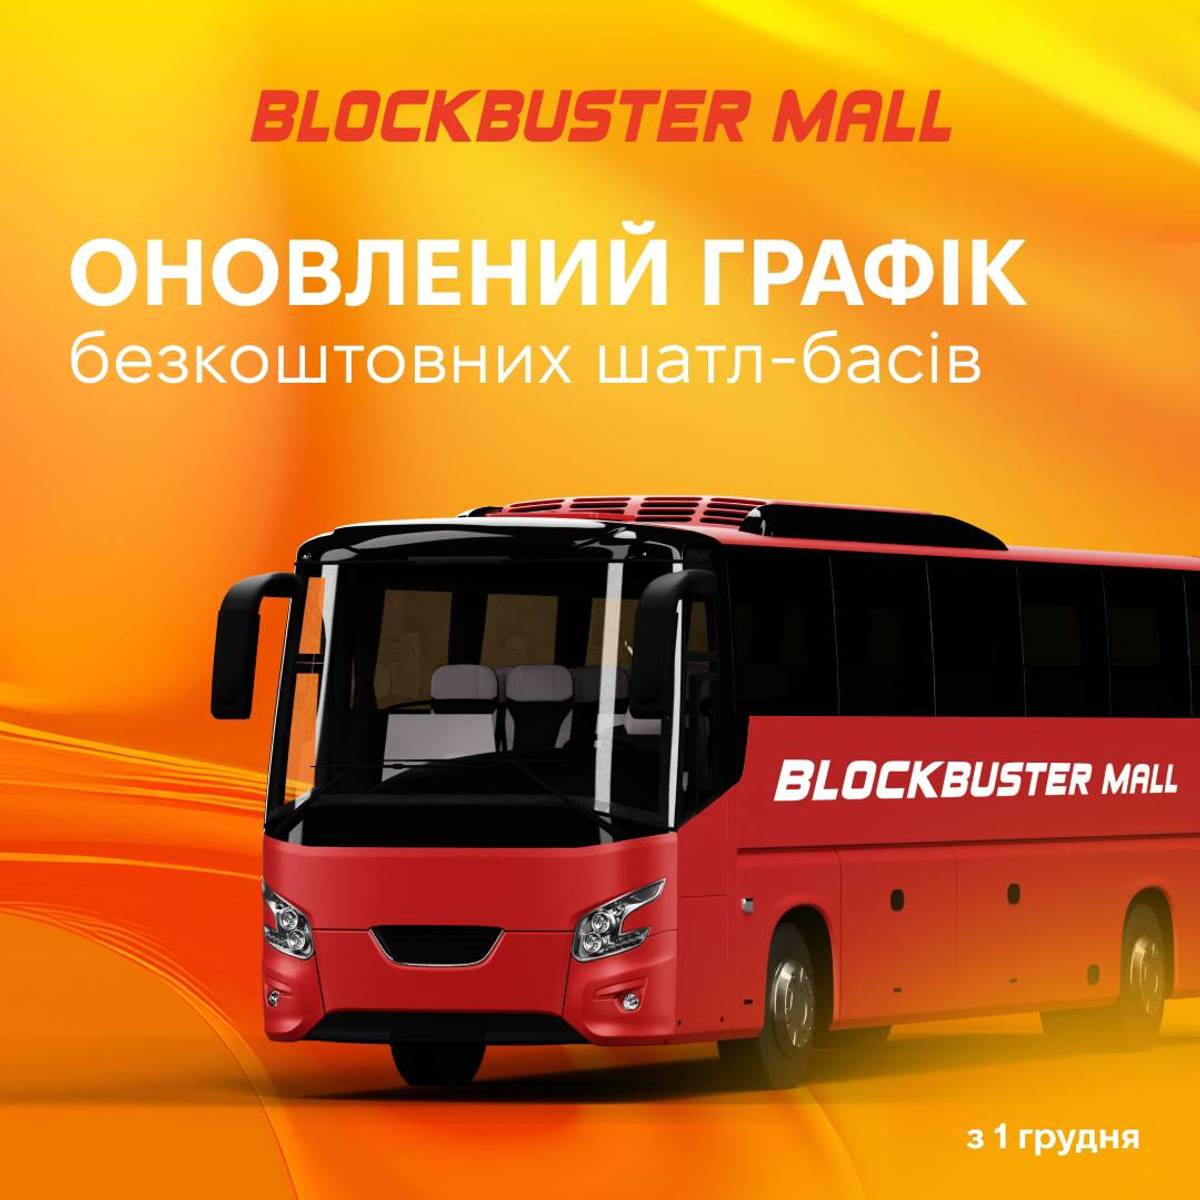 The schedule of free shuttle buses